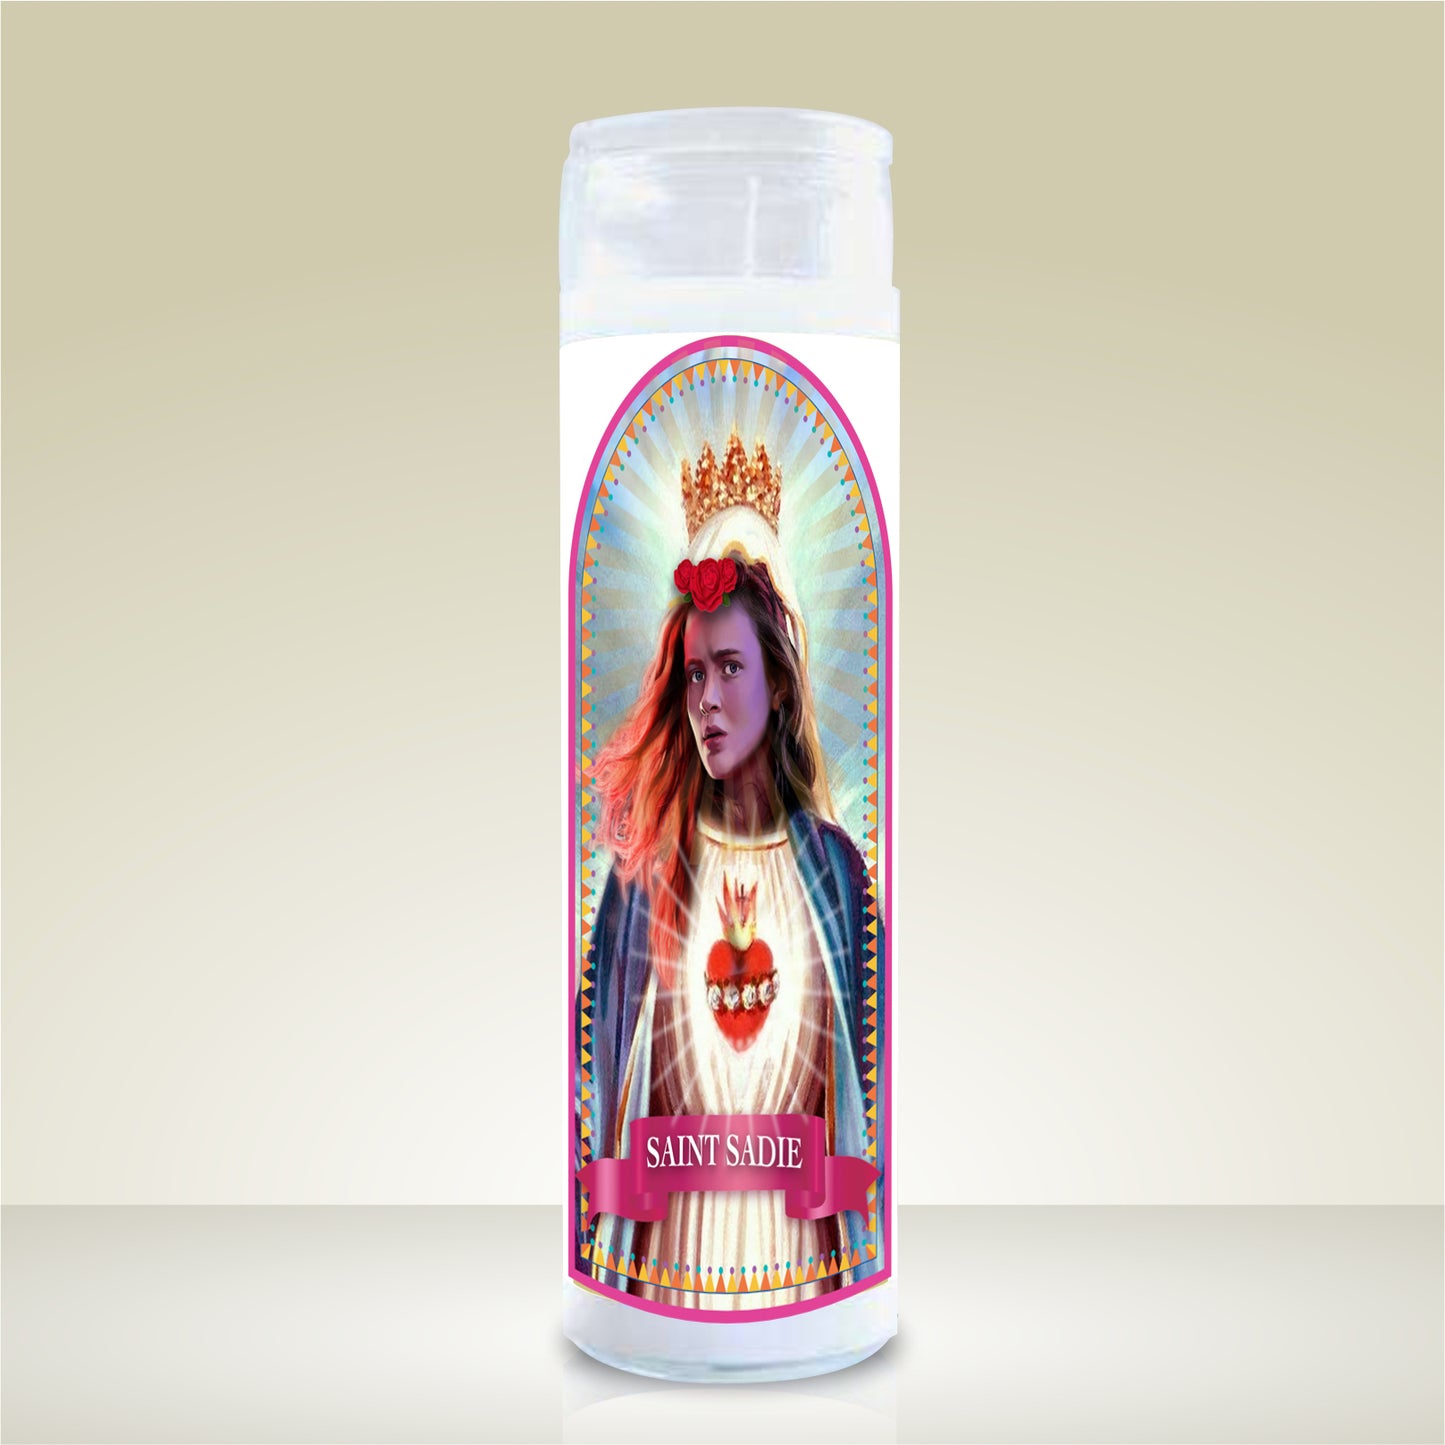 Celebrity Prayer Candle. Sadie Sink. Free Delivery.